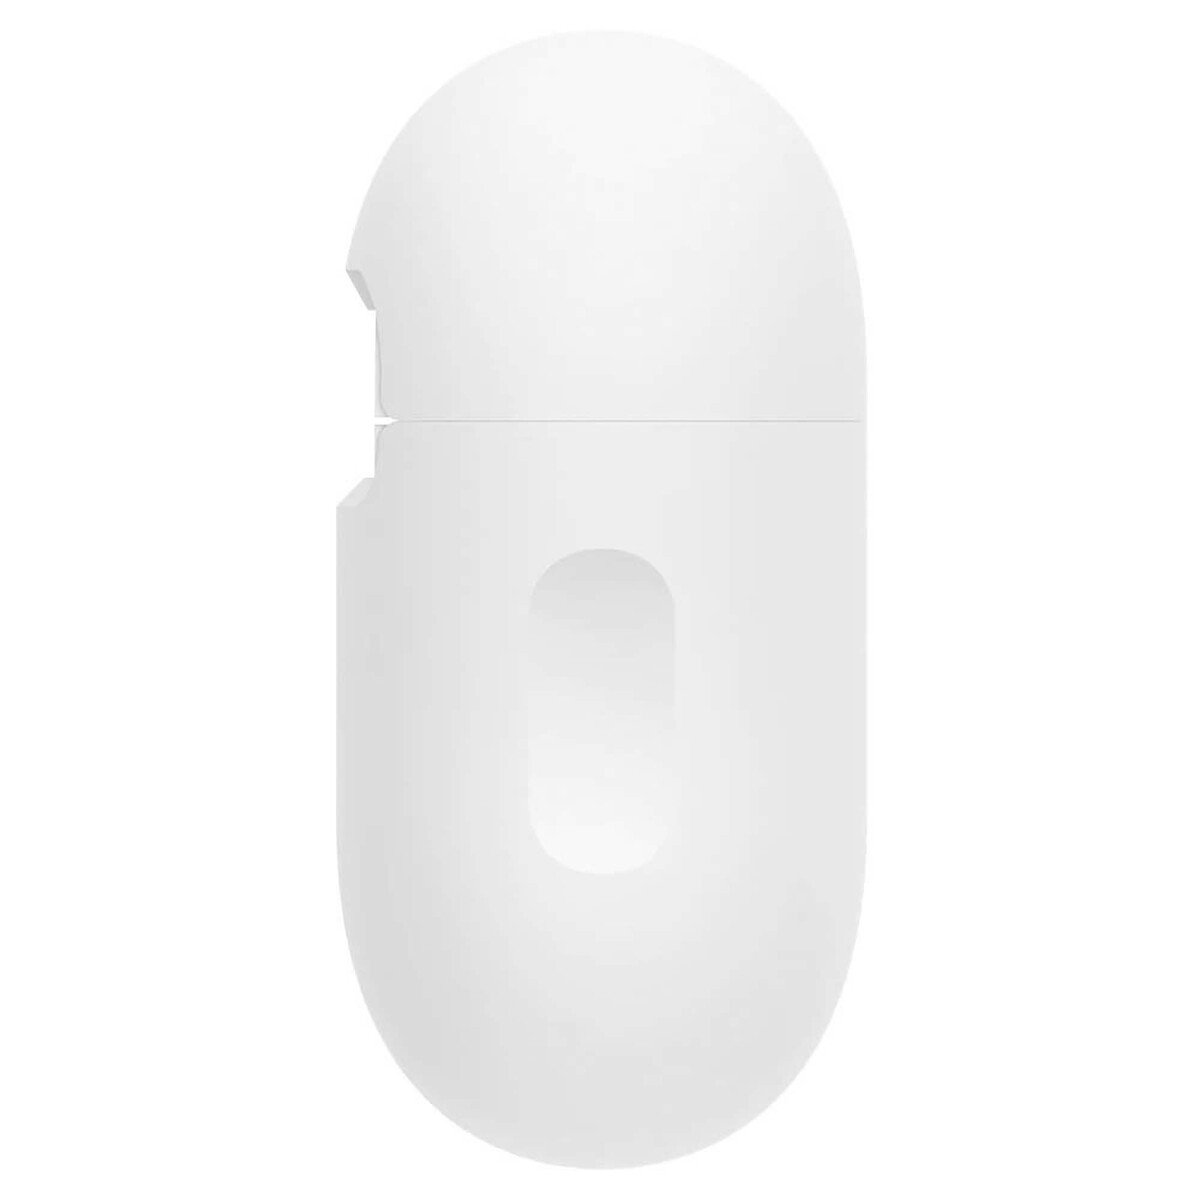 Spigen Silicone Fit Designed For Apple Airpods Pro Case/Cover -White